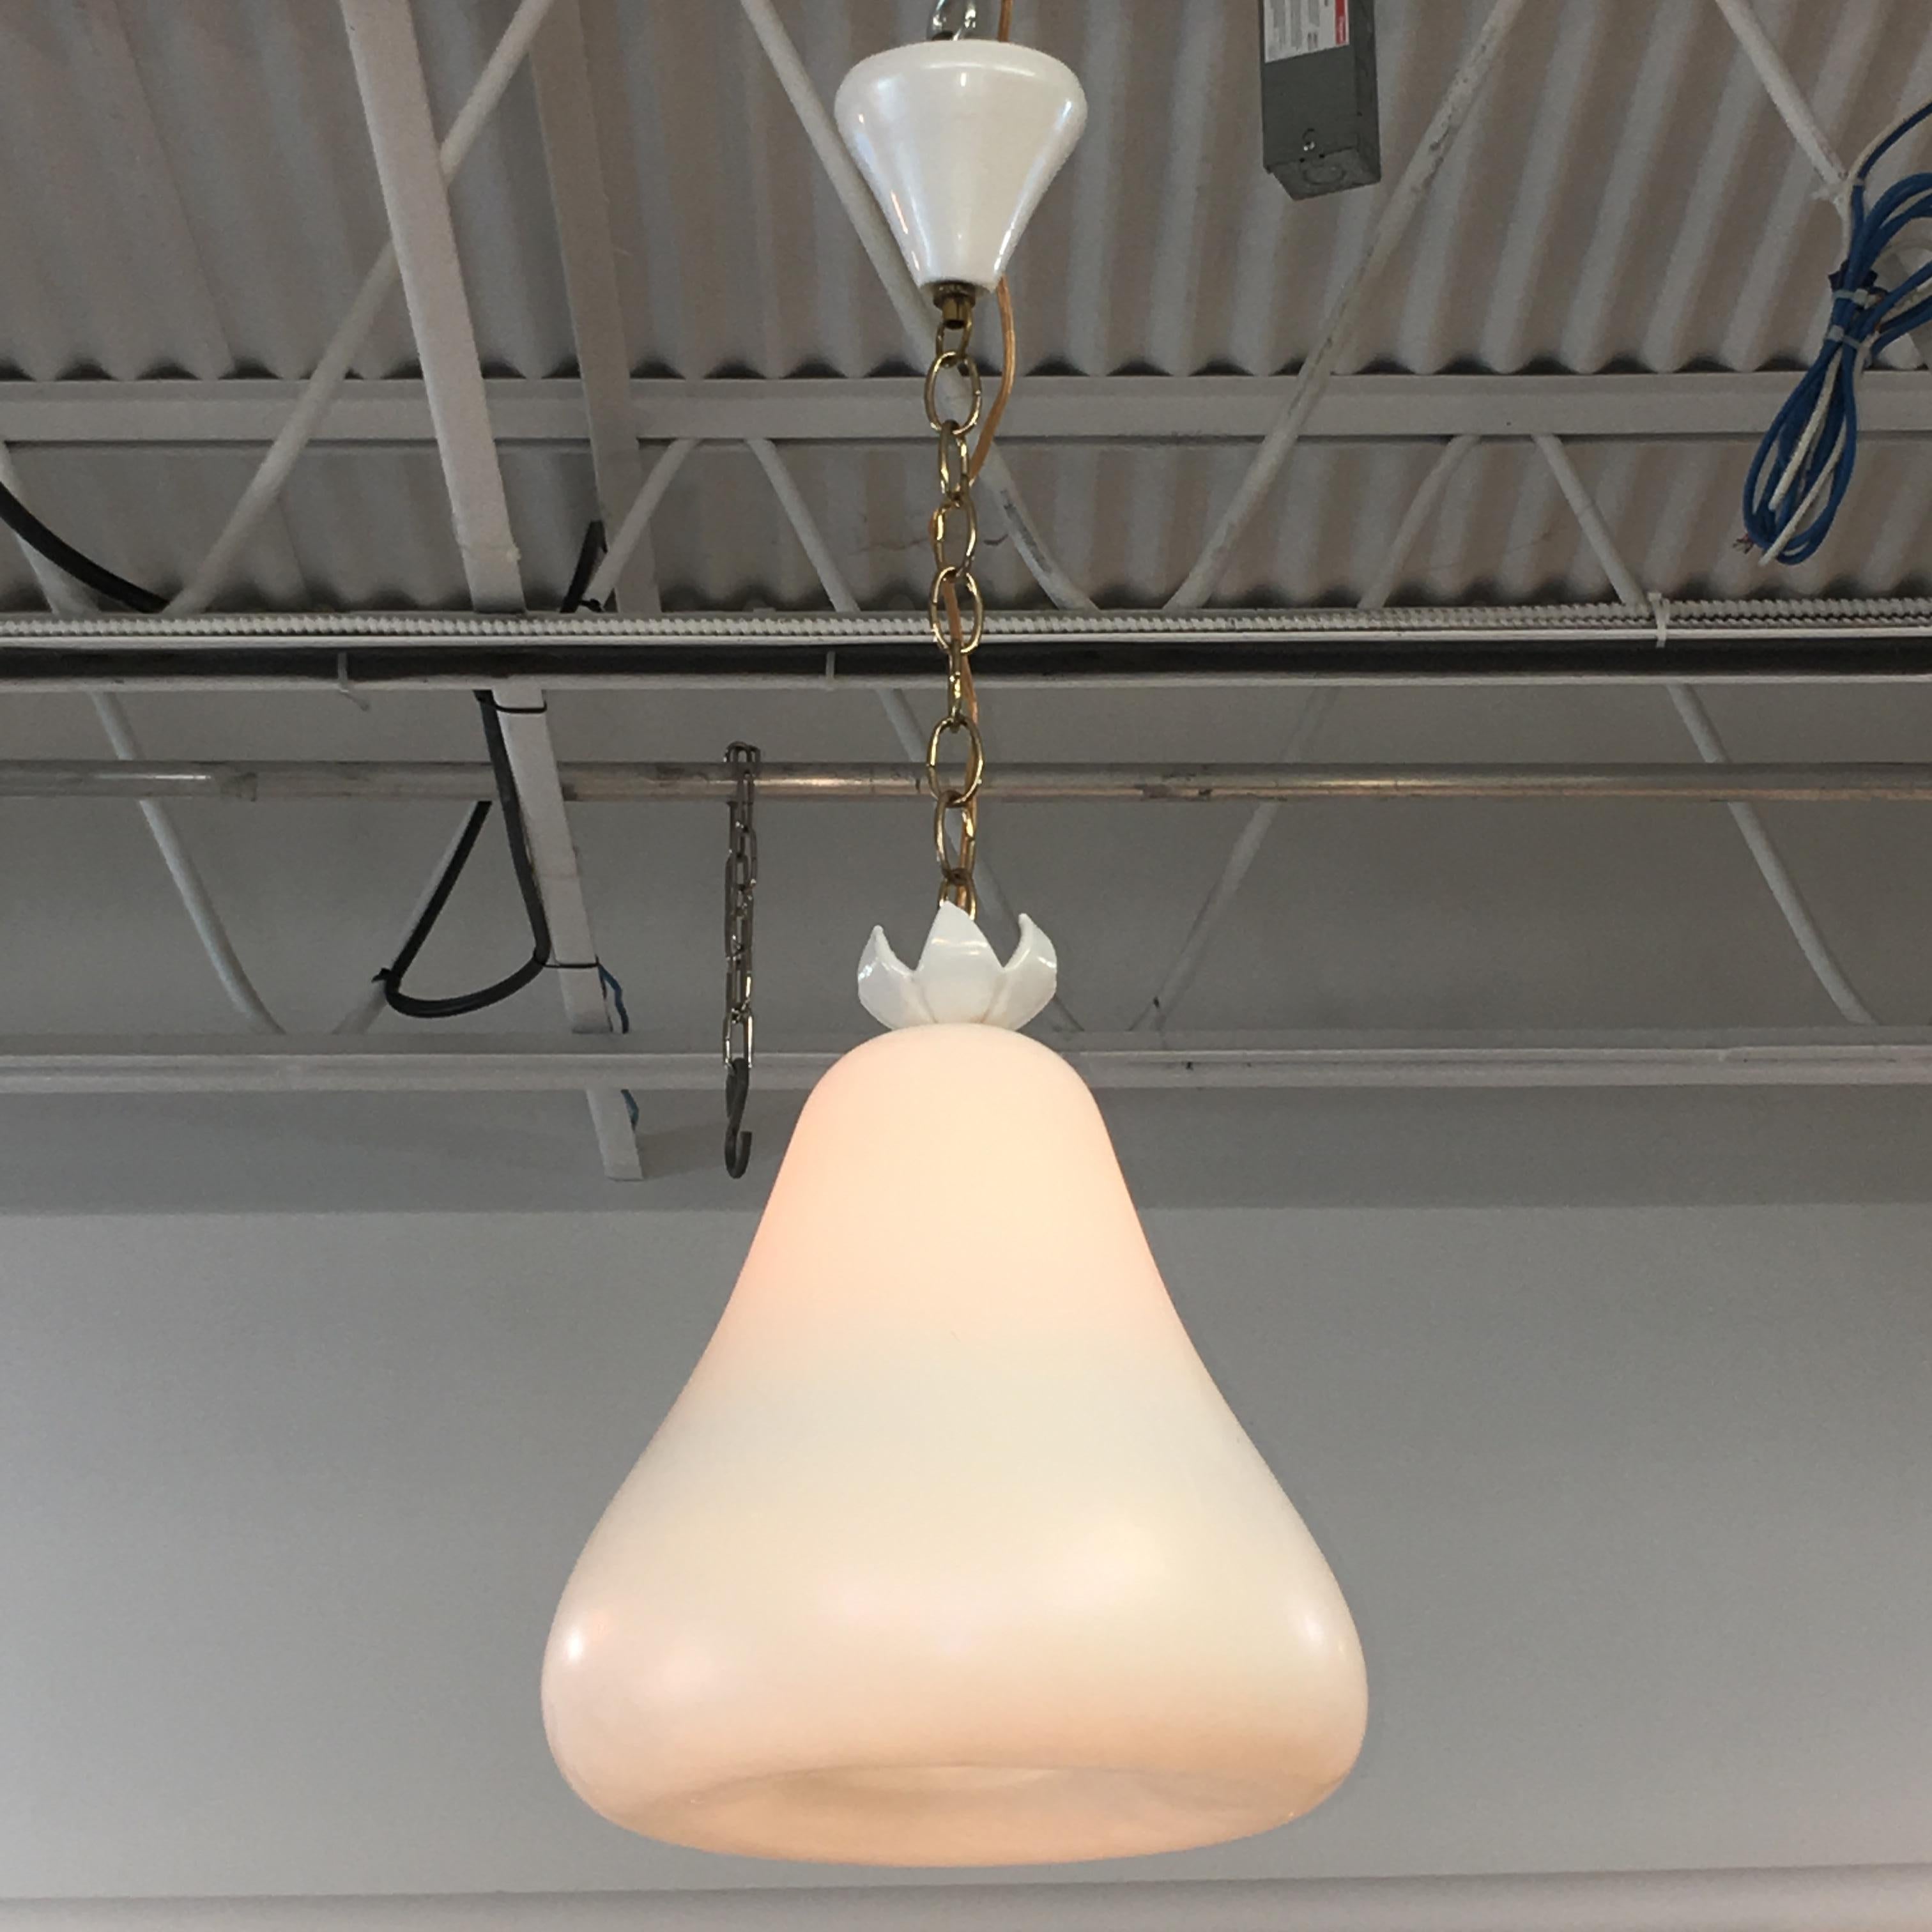 Original iridescent opaque white Murano glass bell-form campagna pendant light commissioned by Aldo Bennati, a Genoese shipping industrialist and owner of the Hotel Bauer in Venice for the 1954 reopening of the famous Grand Hotel Bristol di Merano.